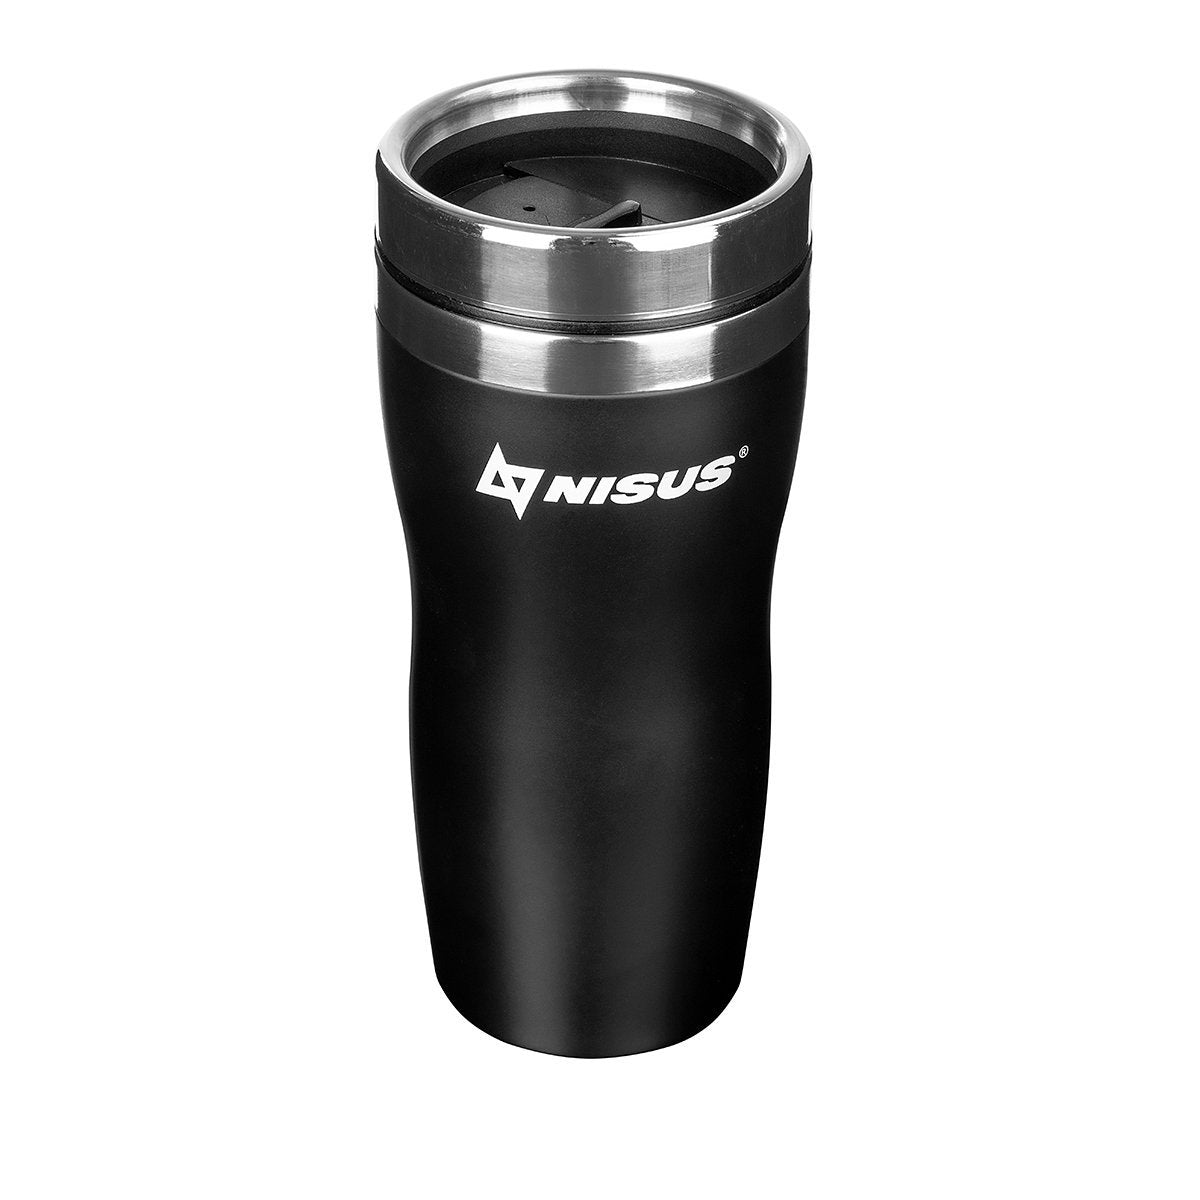 Nisus Stainless Steel Tumbler with Lid, Black, 15 oz